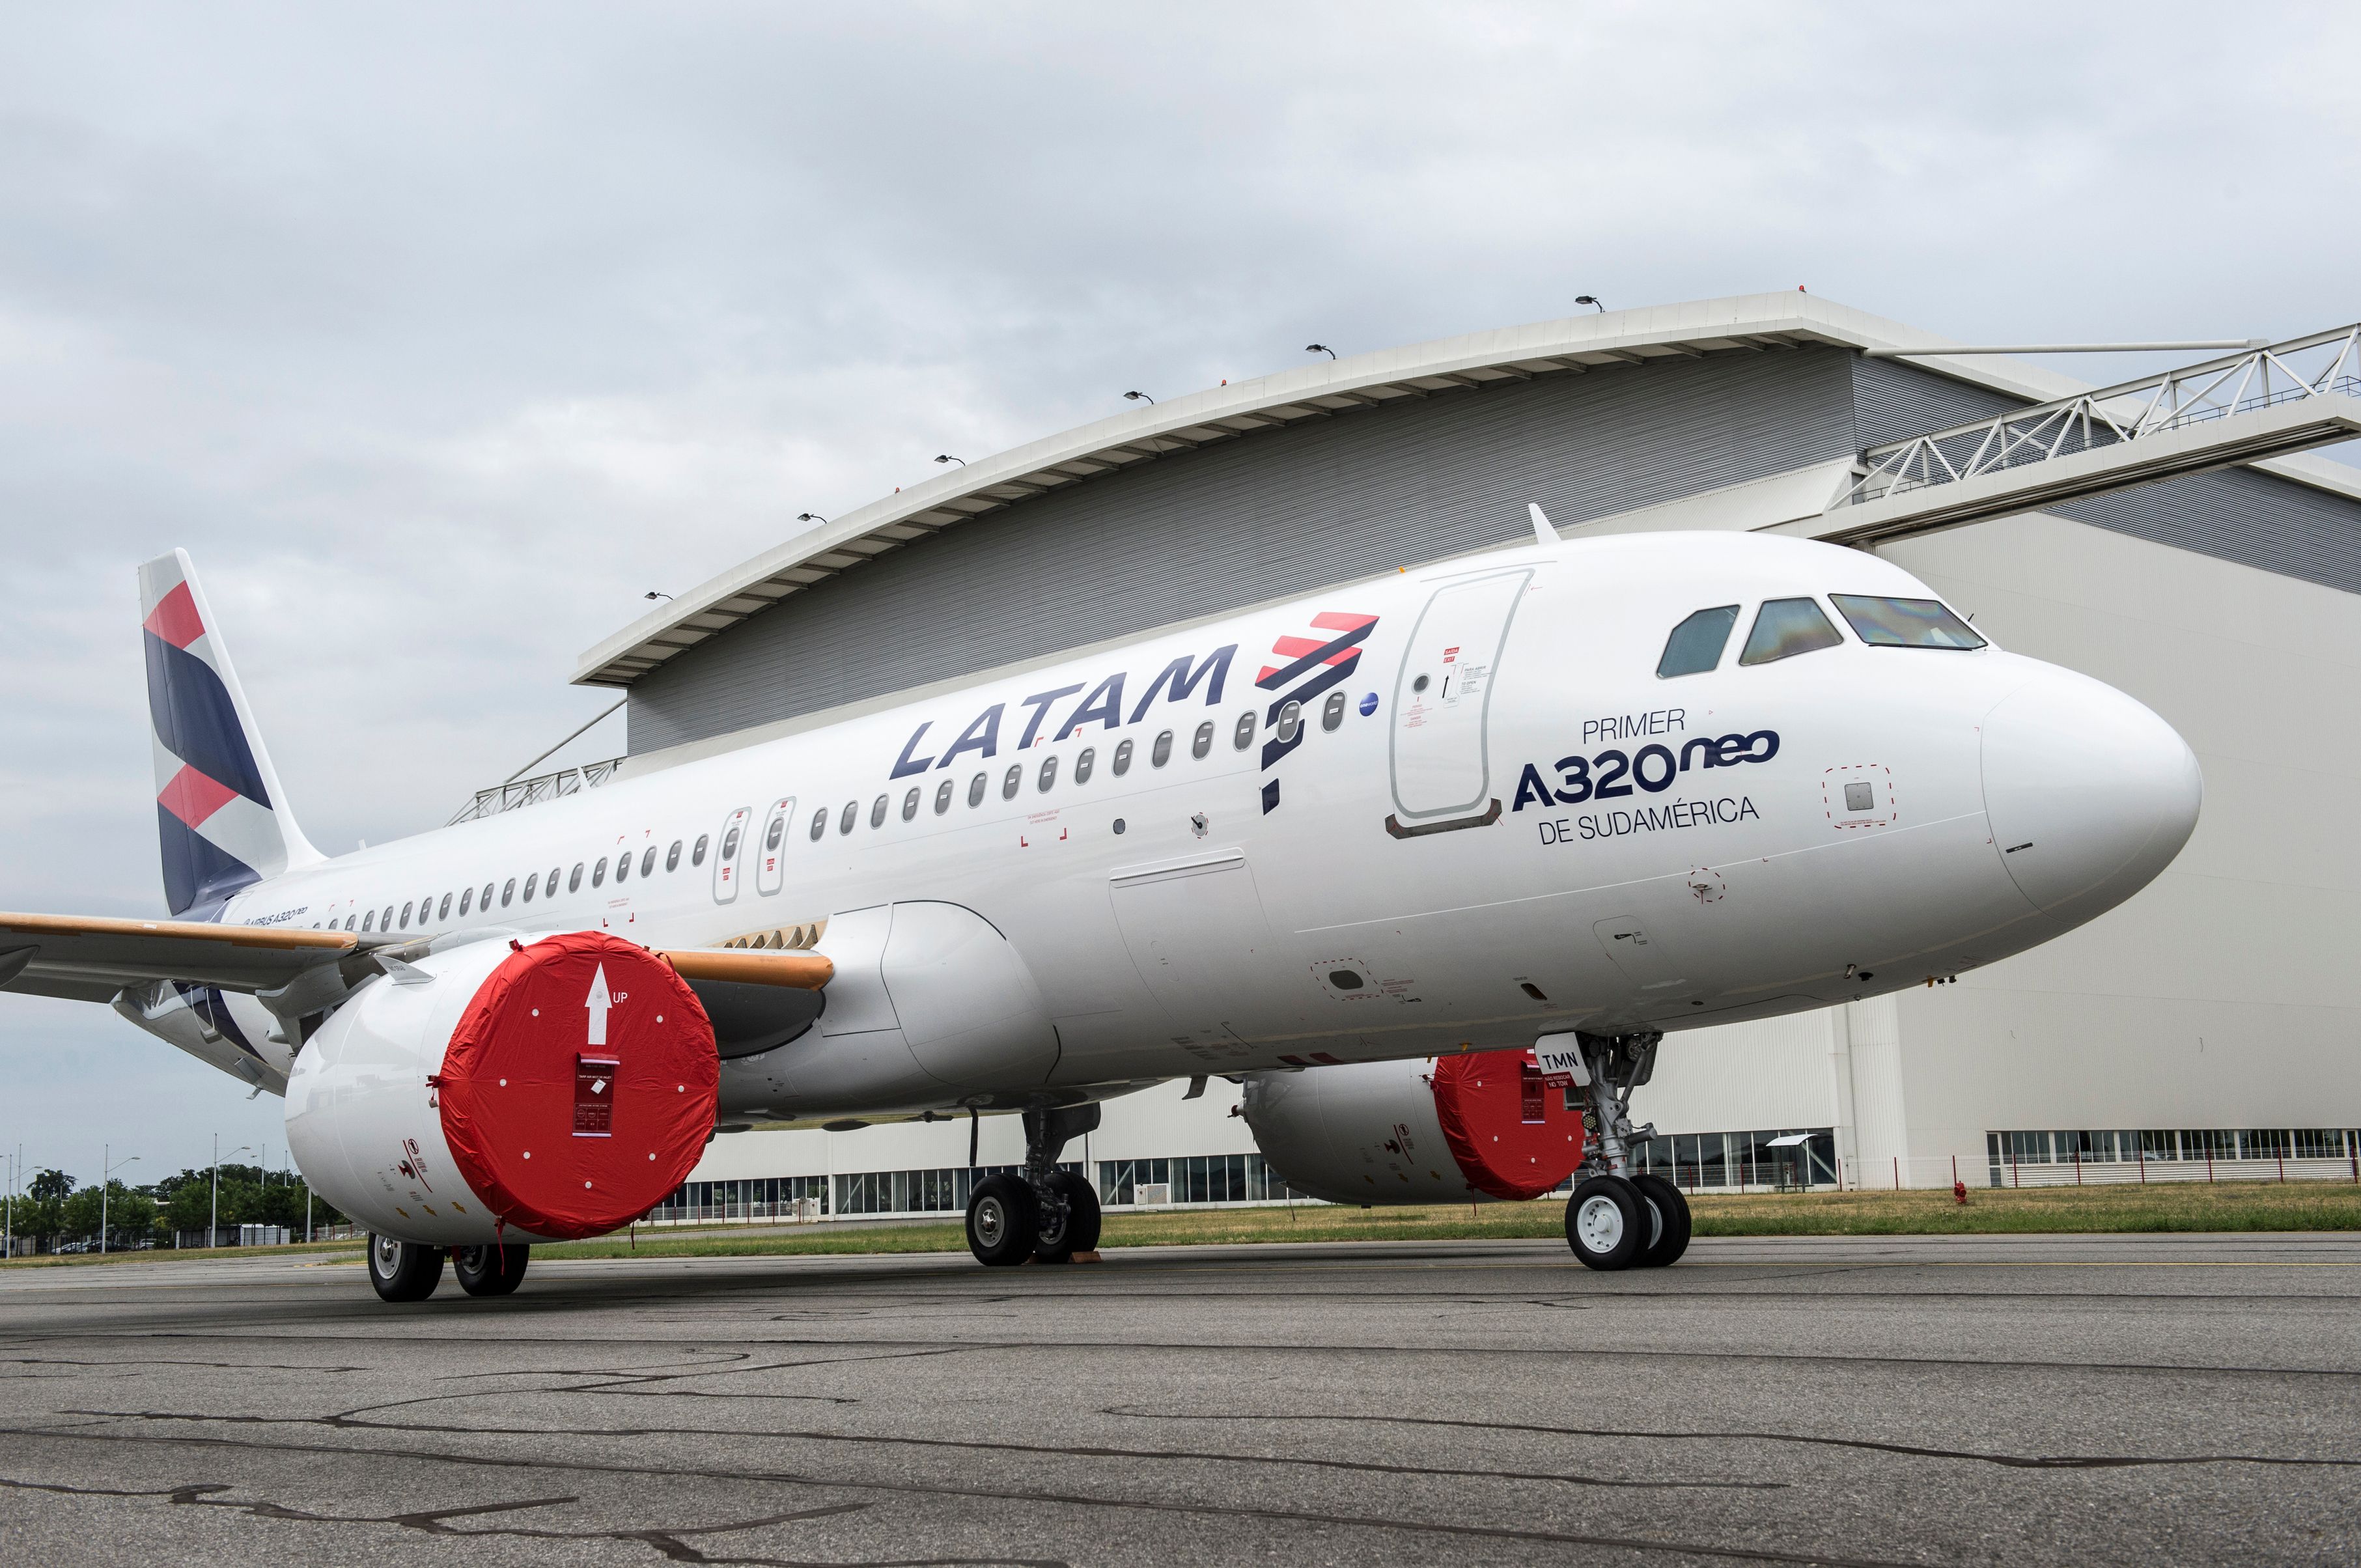 A LATAM A320neo, with a livery that says 'First A320neo in South America' parked. 